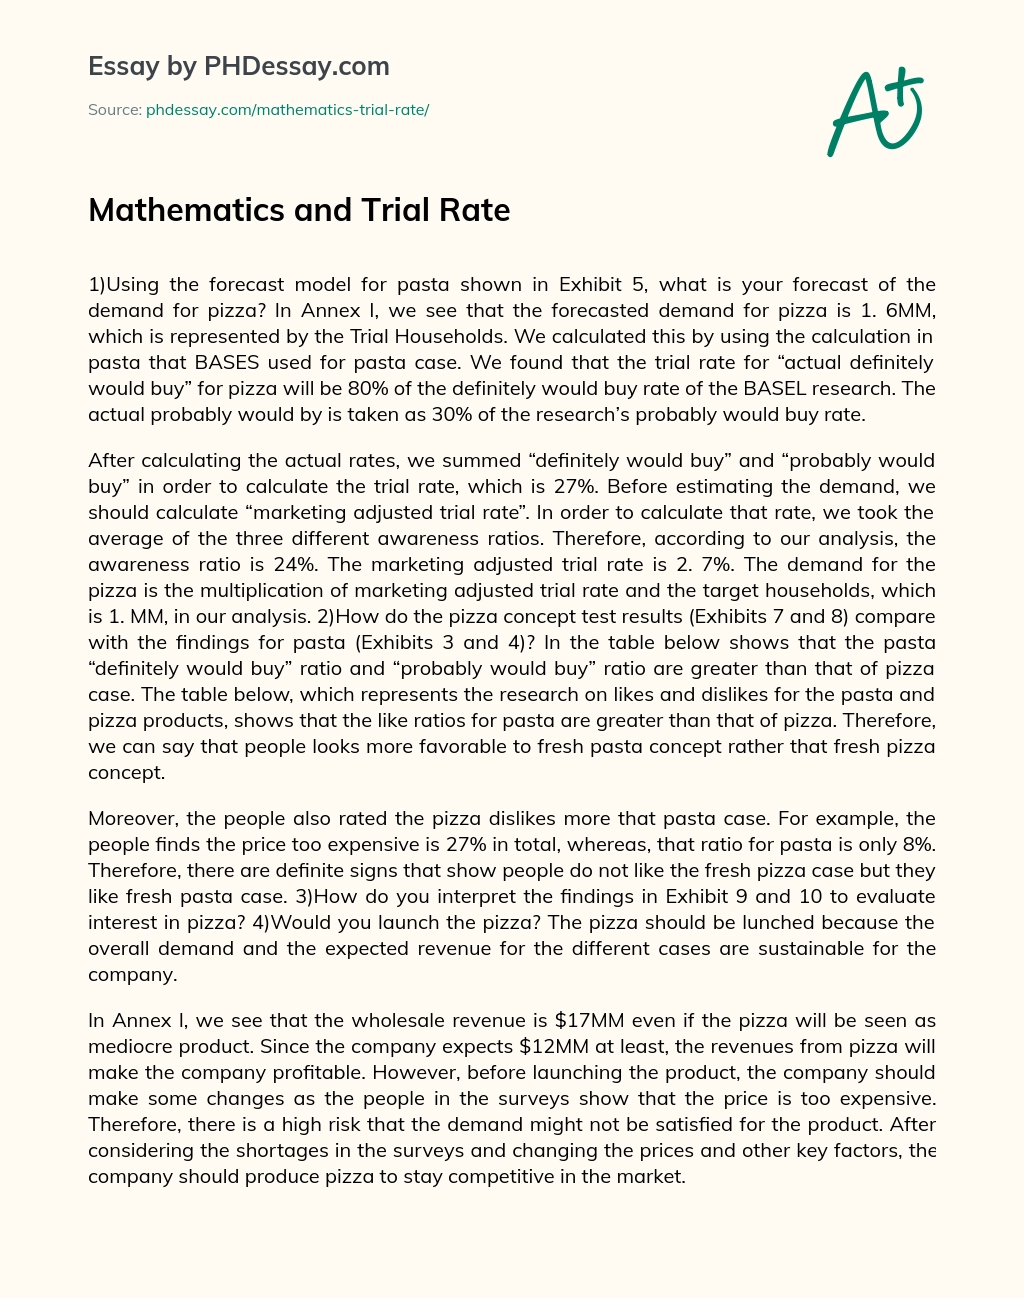 Mathematics and Trial Rate essay